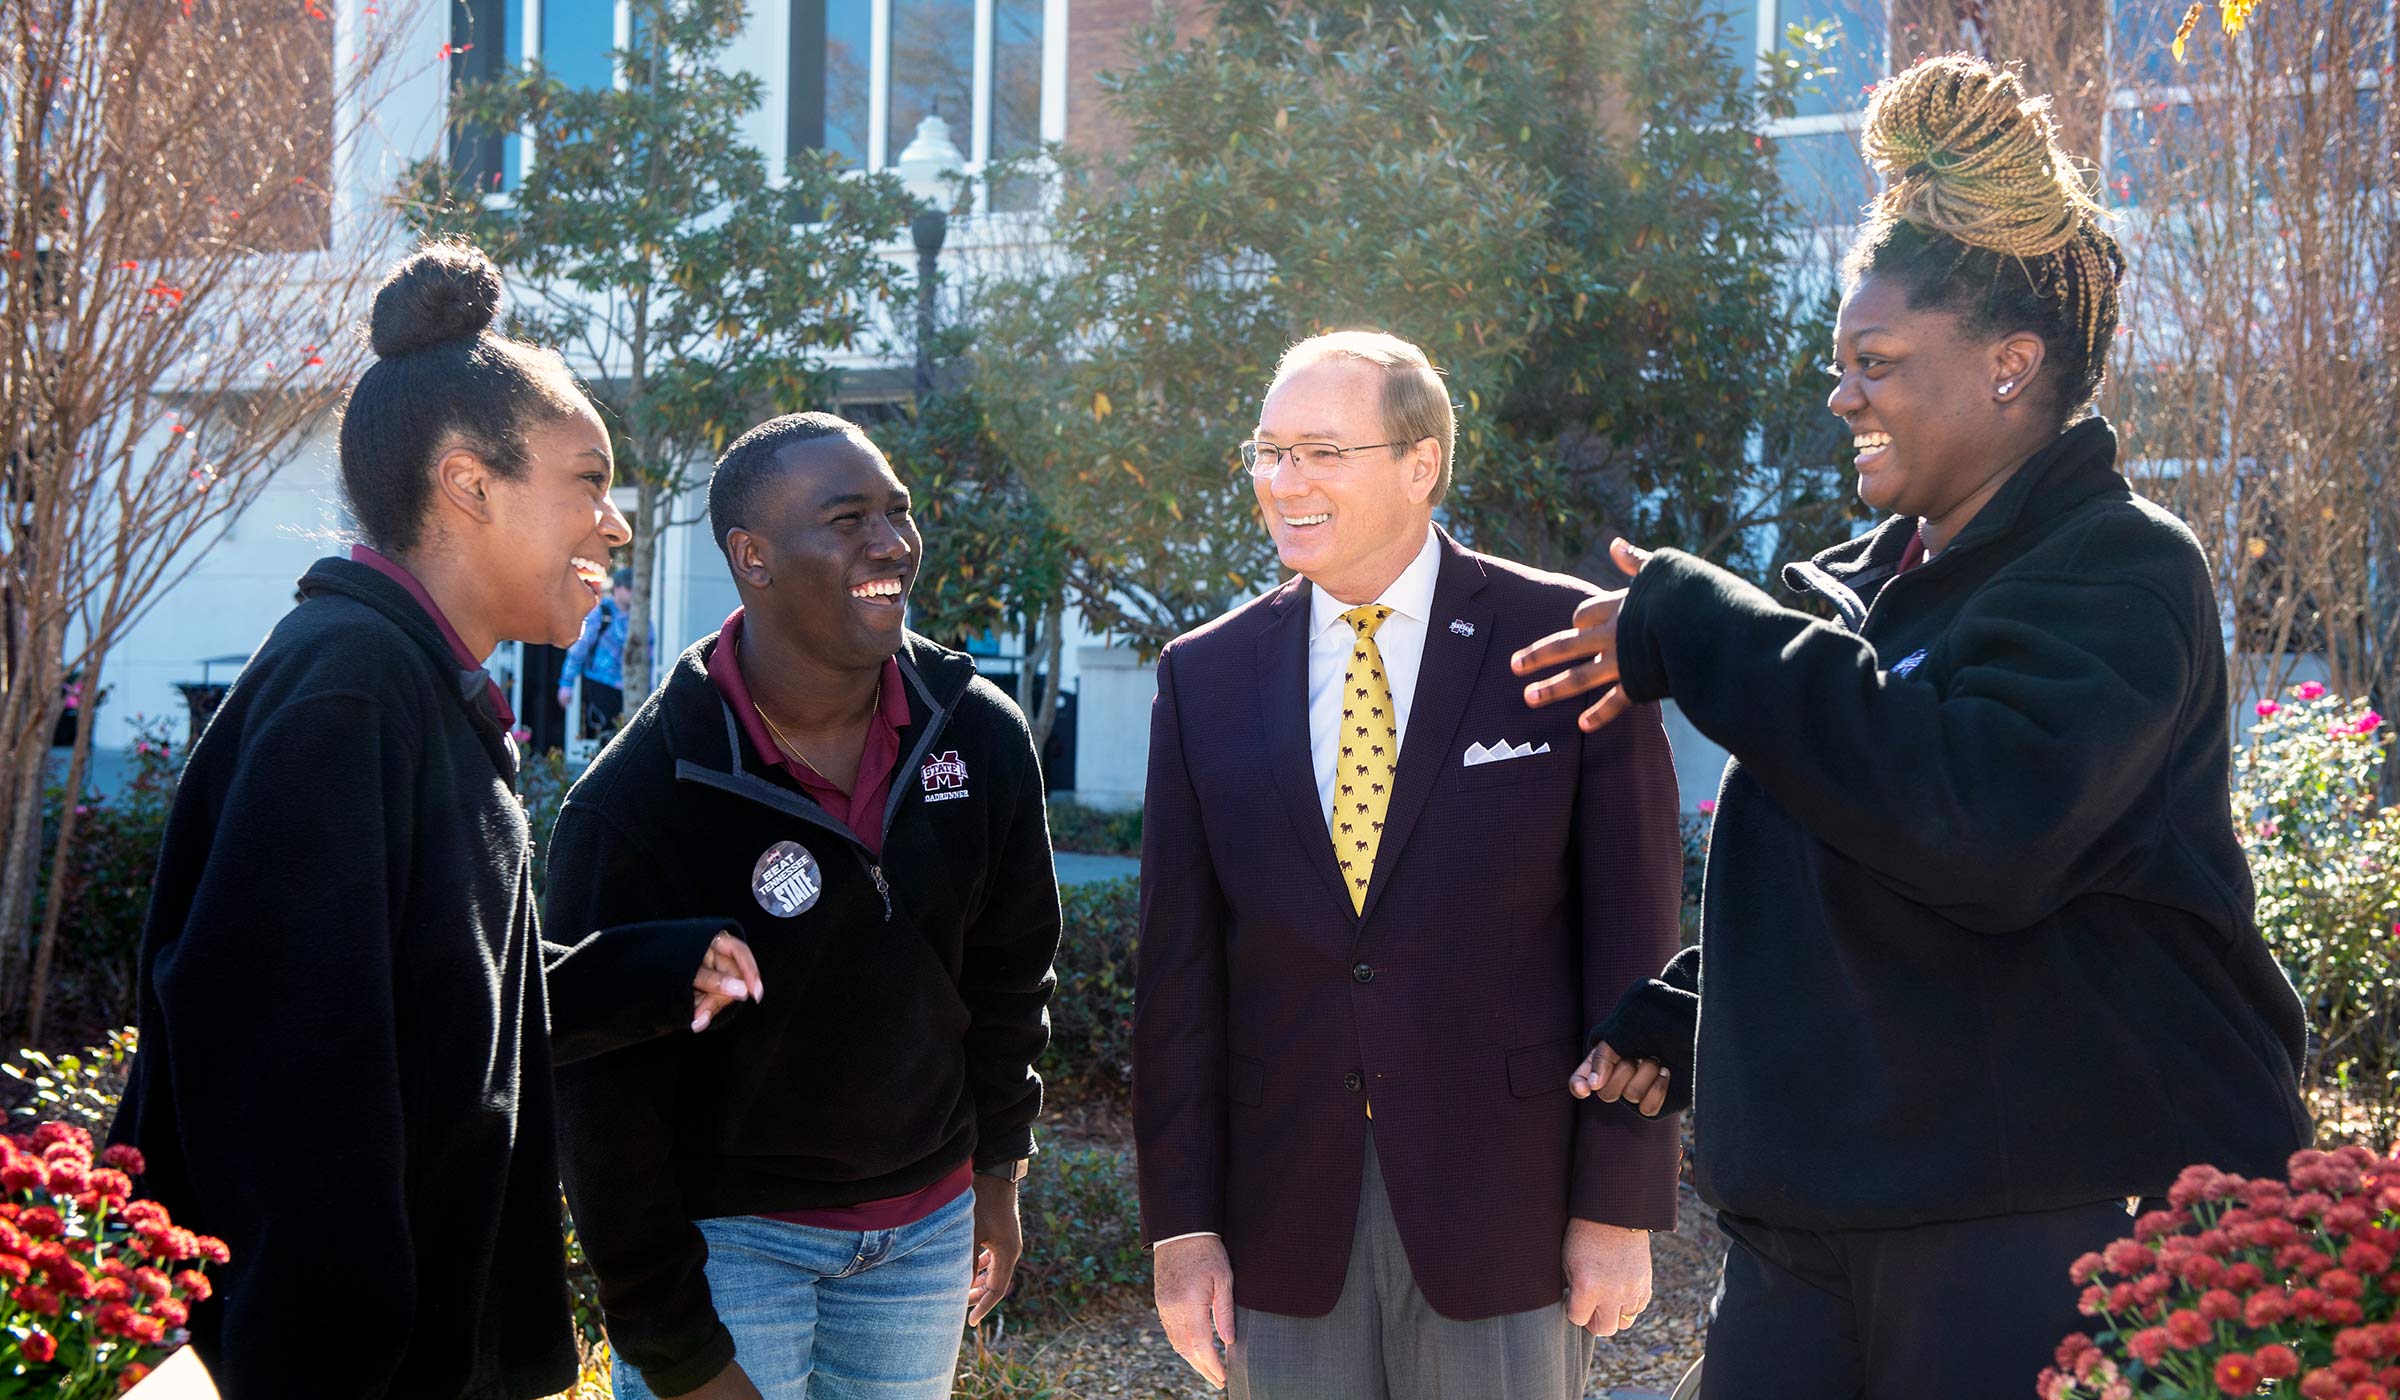 Three students laughing with man in blazer